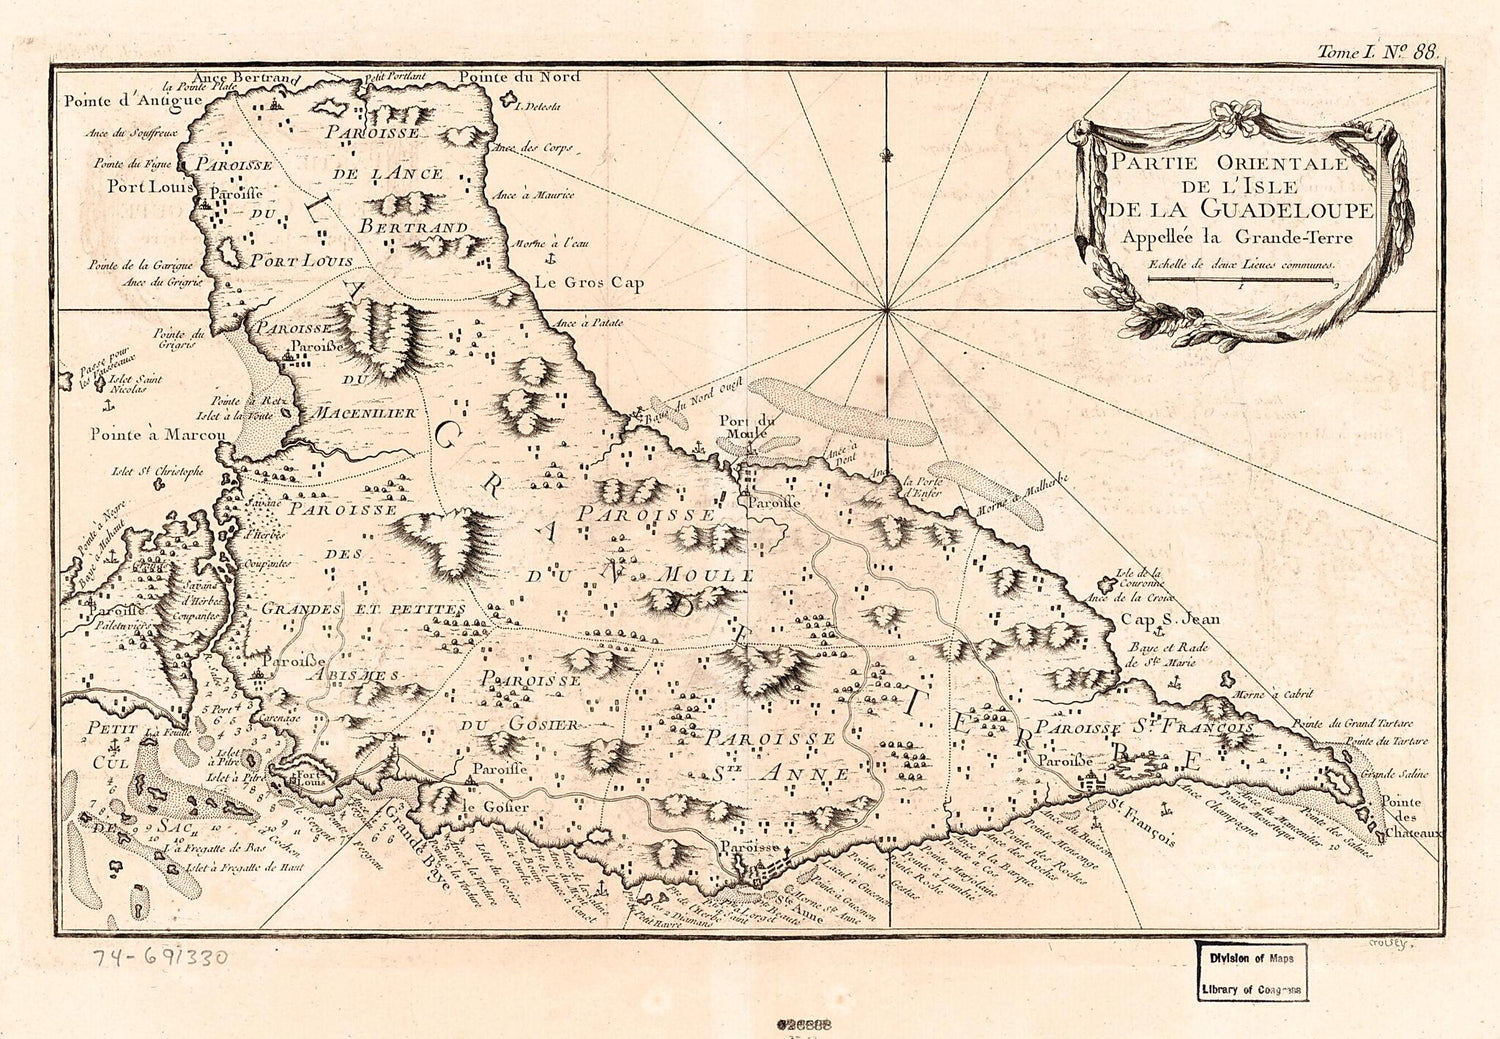 This old map of Terre from 1764 was created by Jacques Nicolas] [Bellin, P. Croisey in 1764